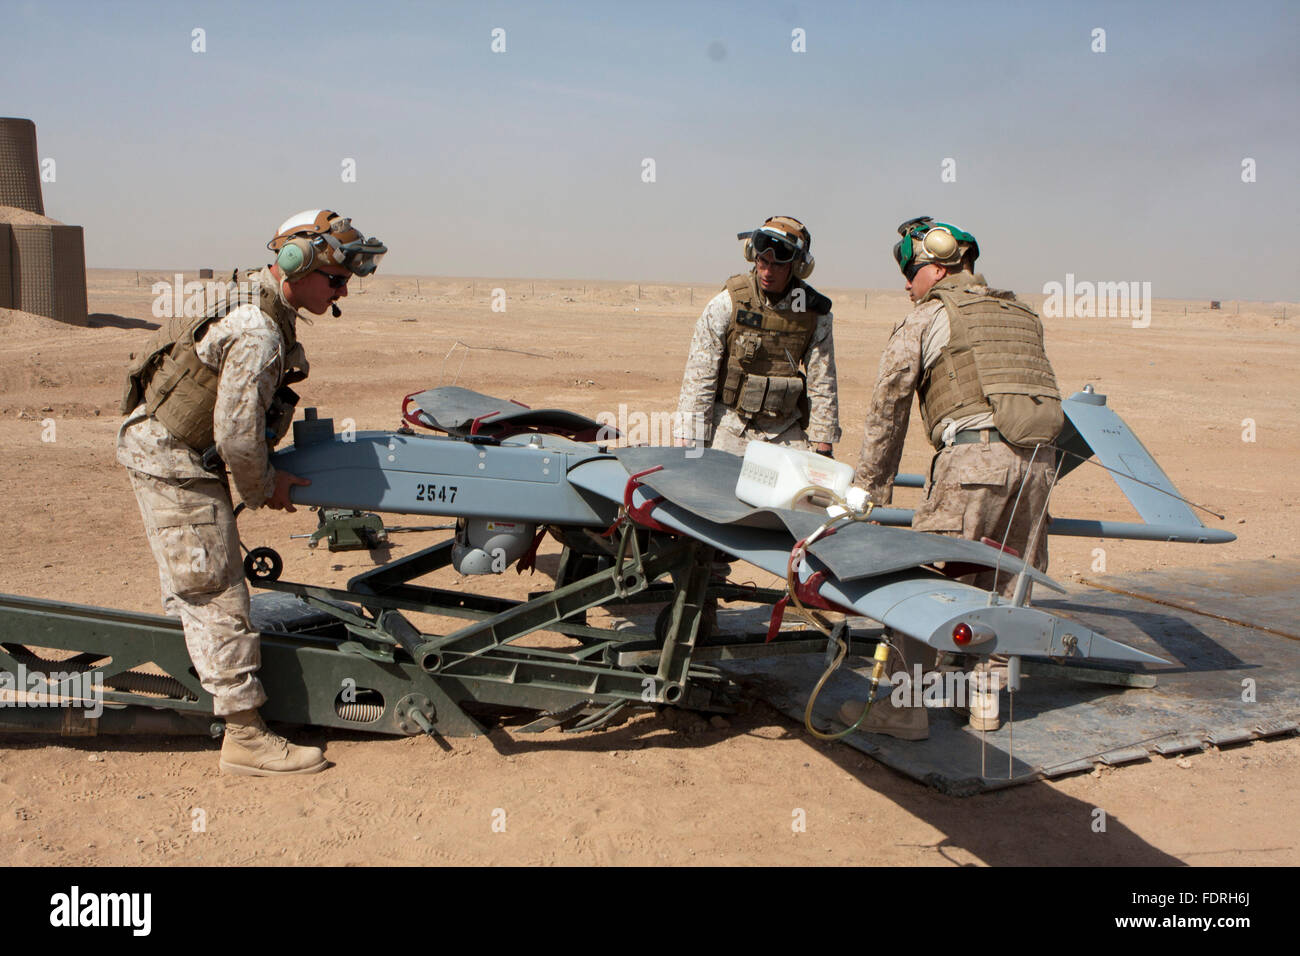 U.S. soldiers prepare to launch unmanned aerial vehicles - UAVs - or as most commonly known - drones. Stock Photo